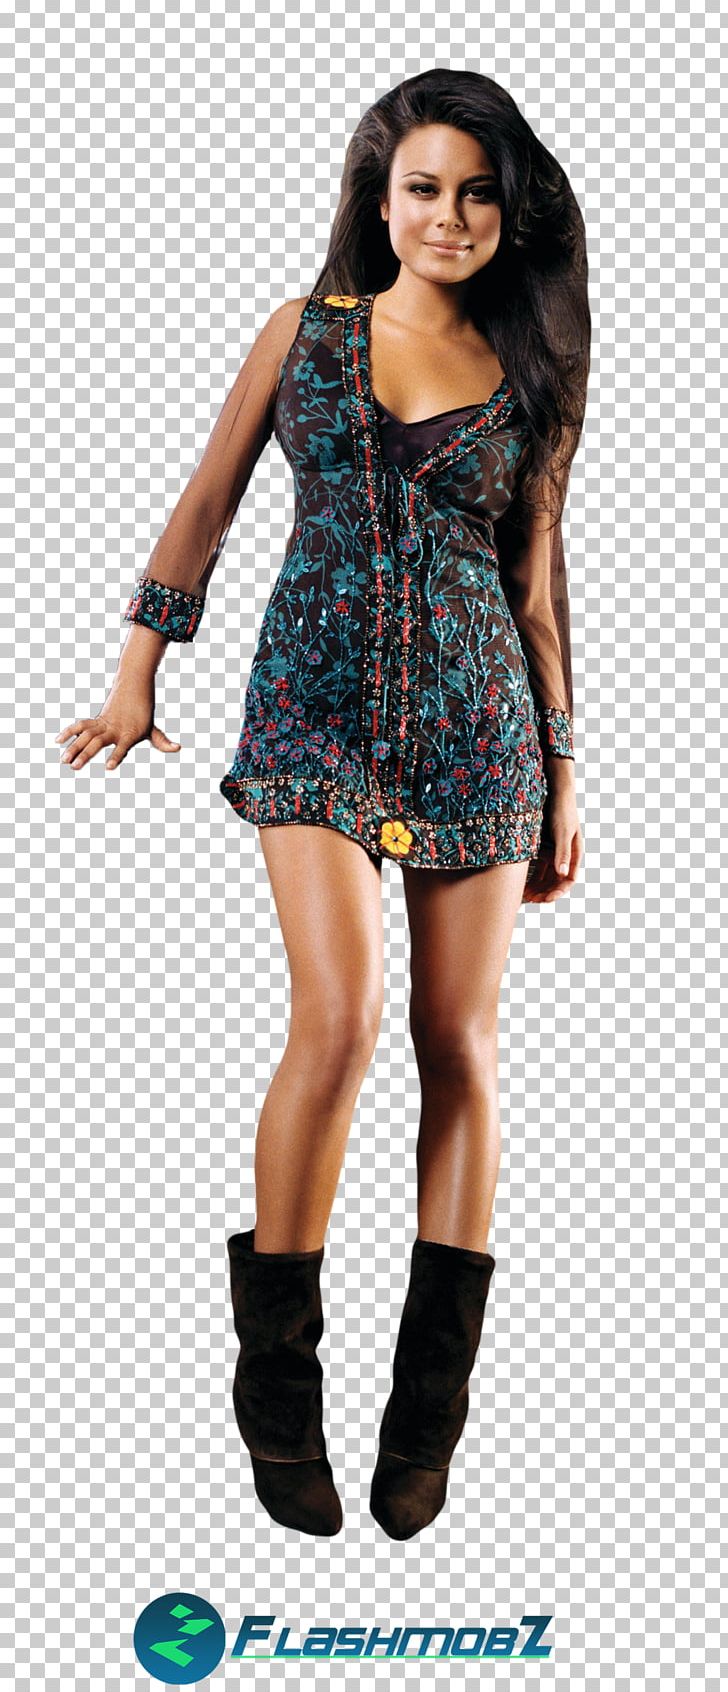 Nathalie Kelley The Fast And The Furious: Tokyo Drift Neela Film PNG, Clipart, Actor, Art, Celebrities, Clothing, Costume Free PNG Download